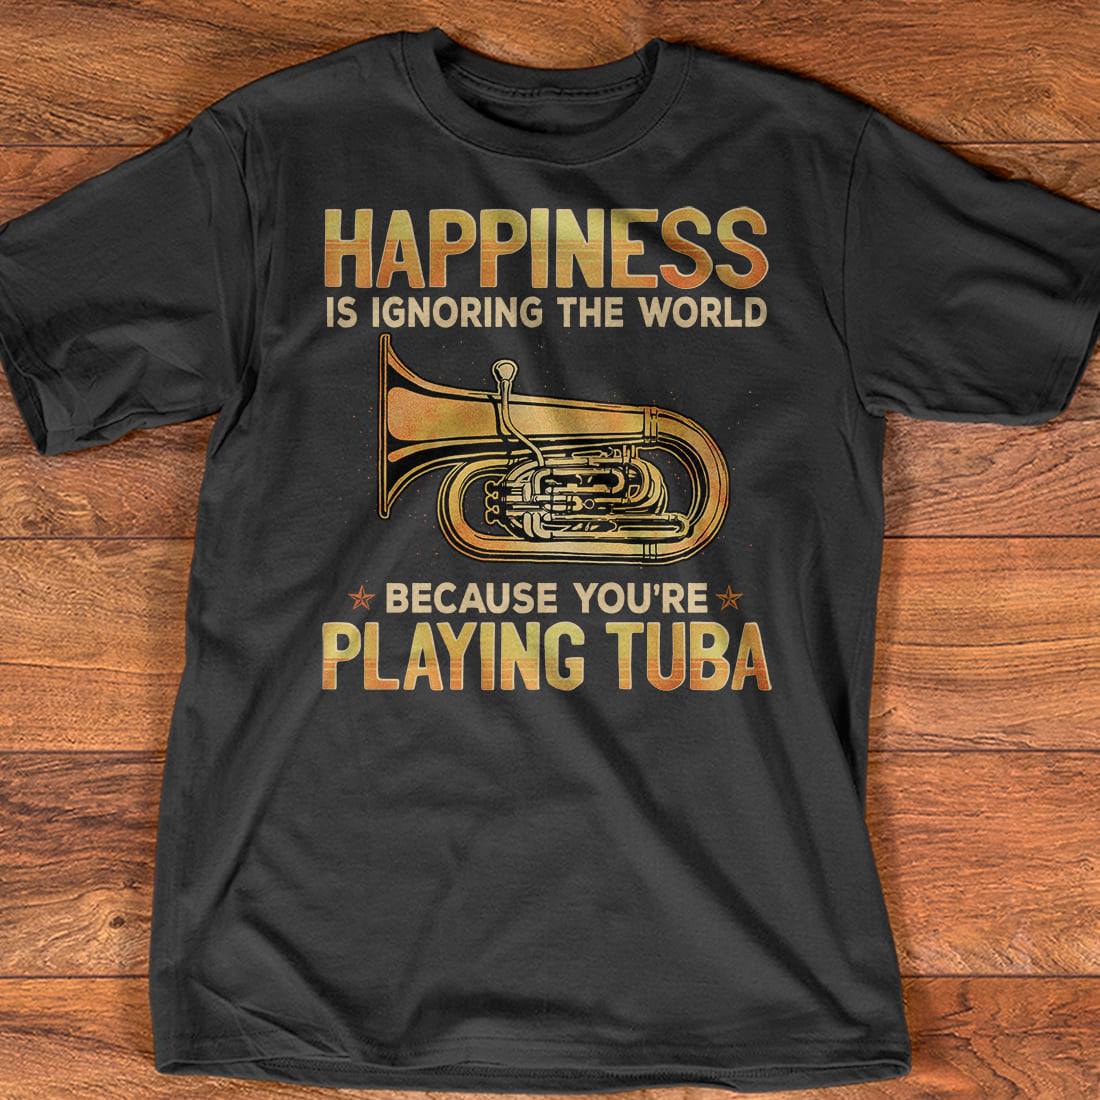 Tuba Lover - Happiness is ignoring the world because you're playing tuba